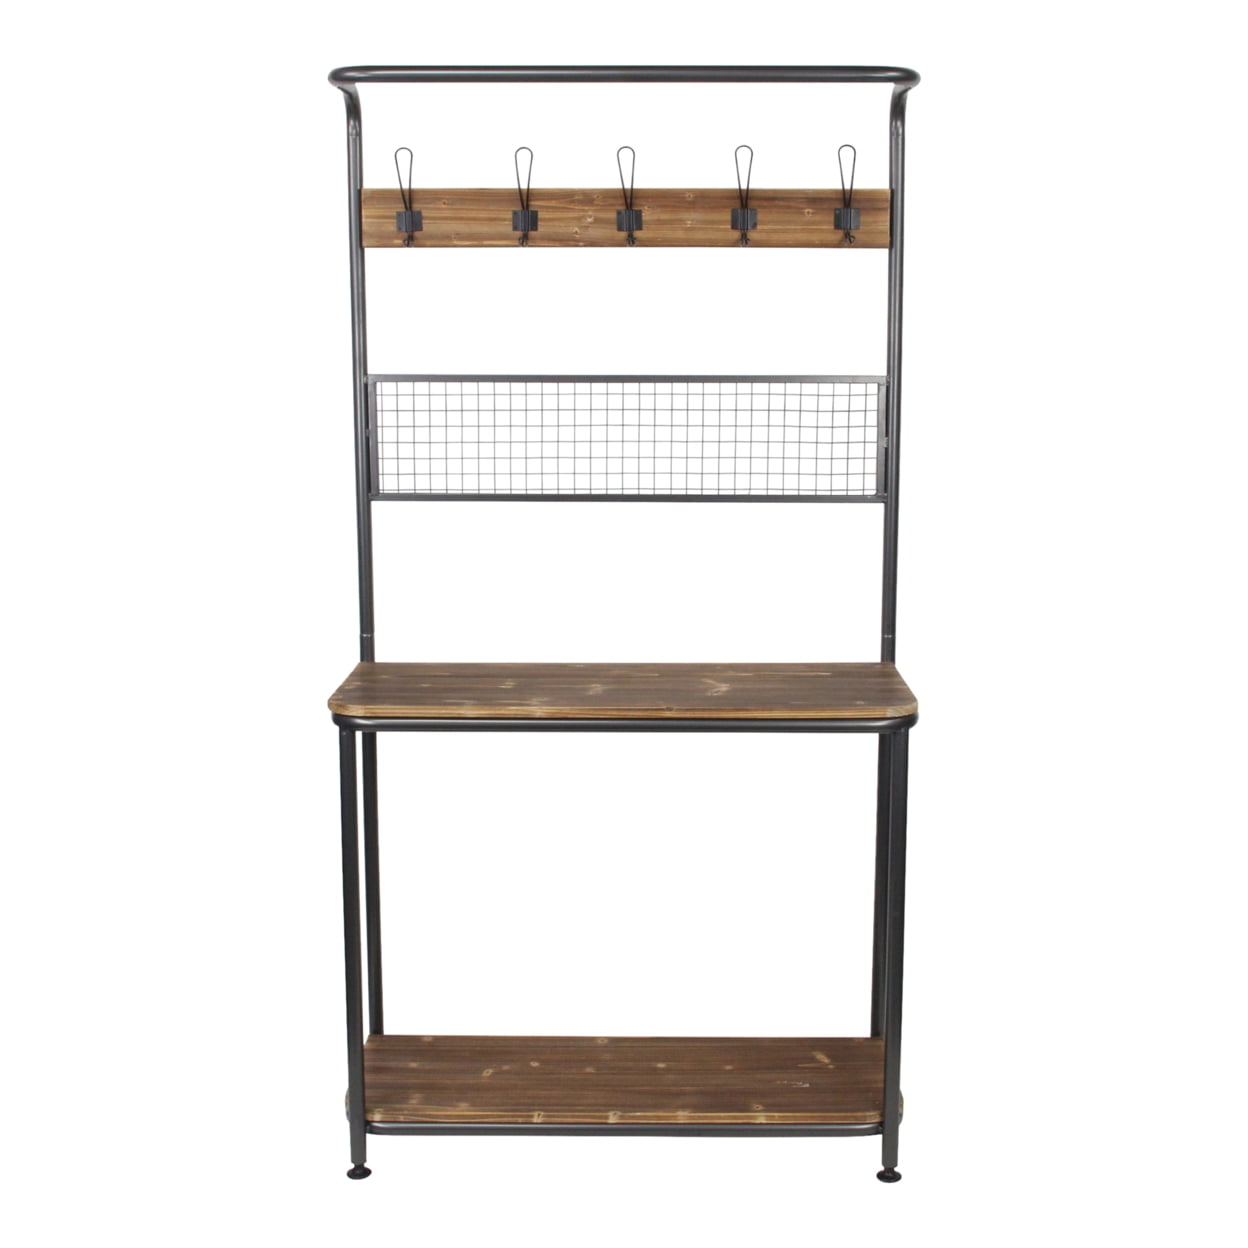 Fp-4254 Garden Storage Table With Hooks